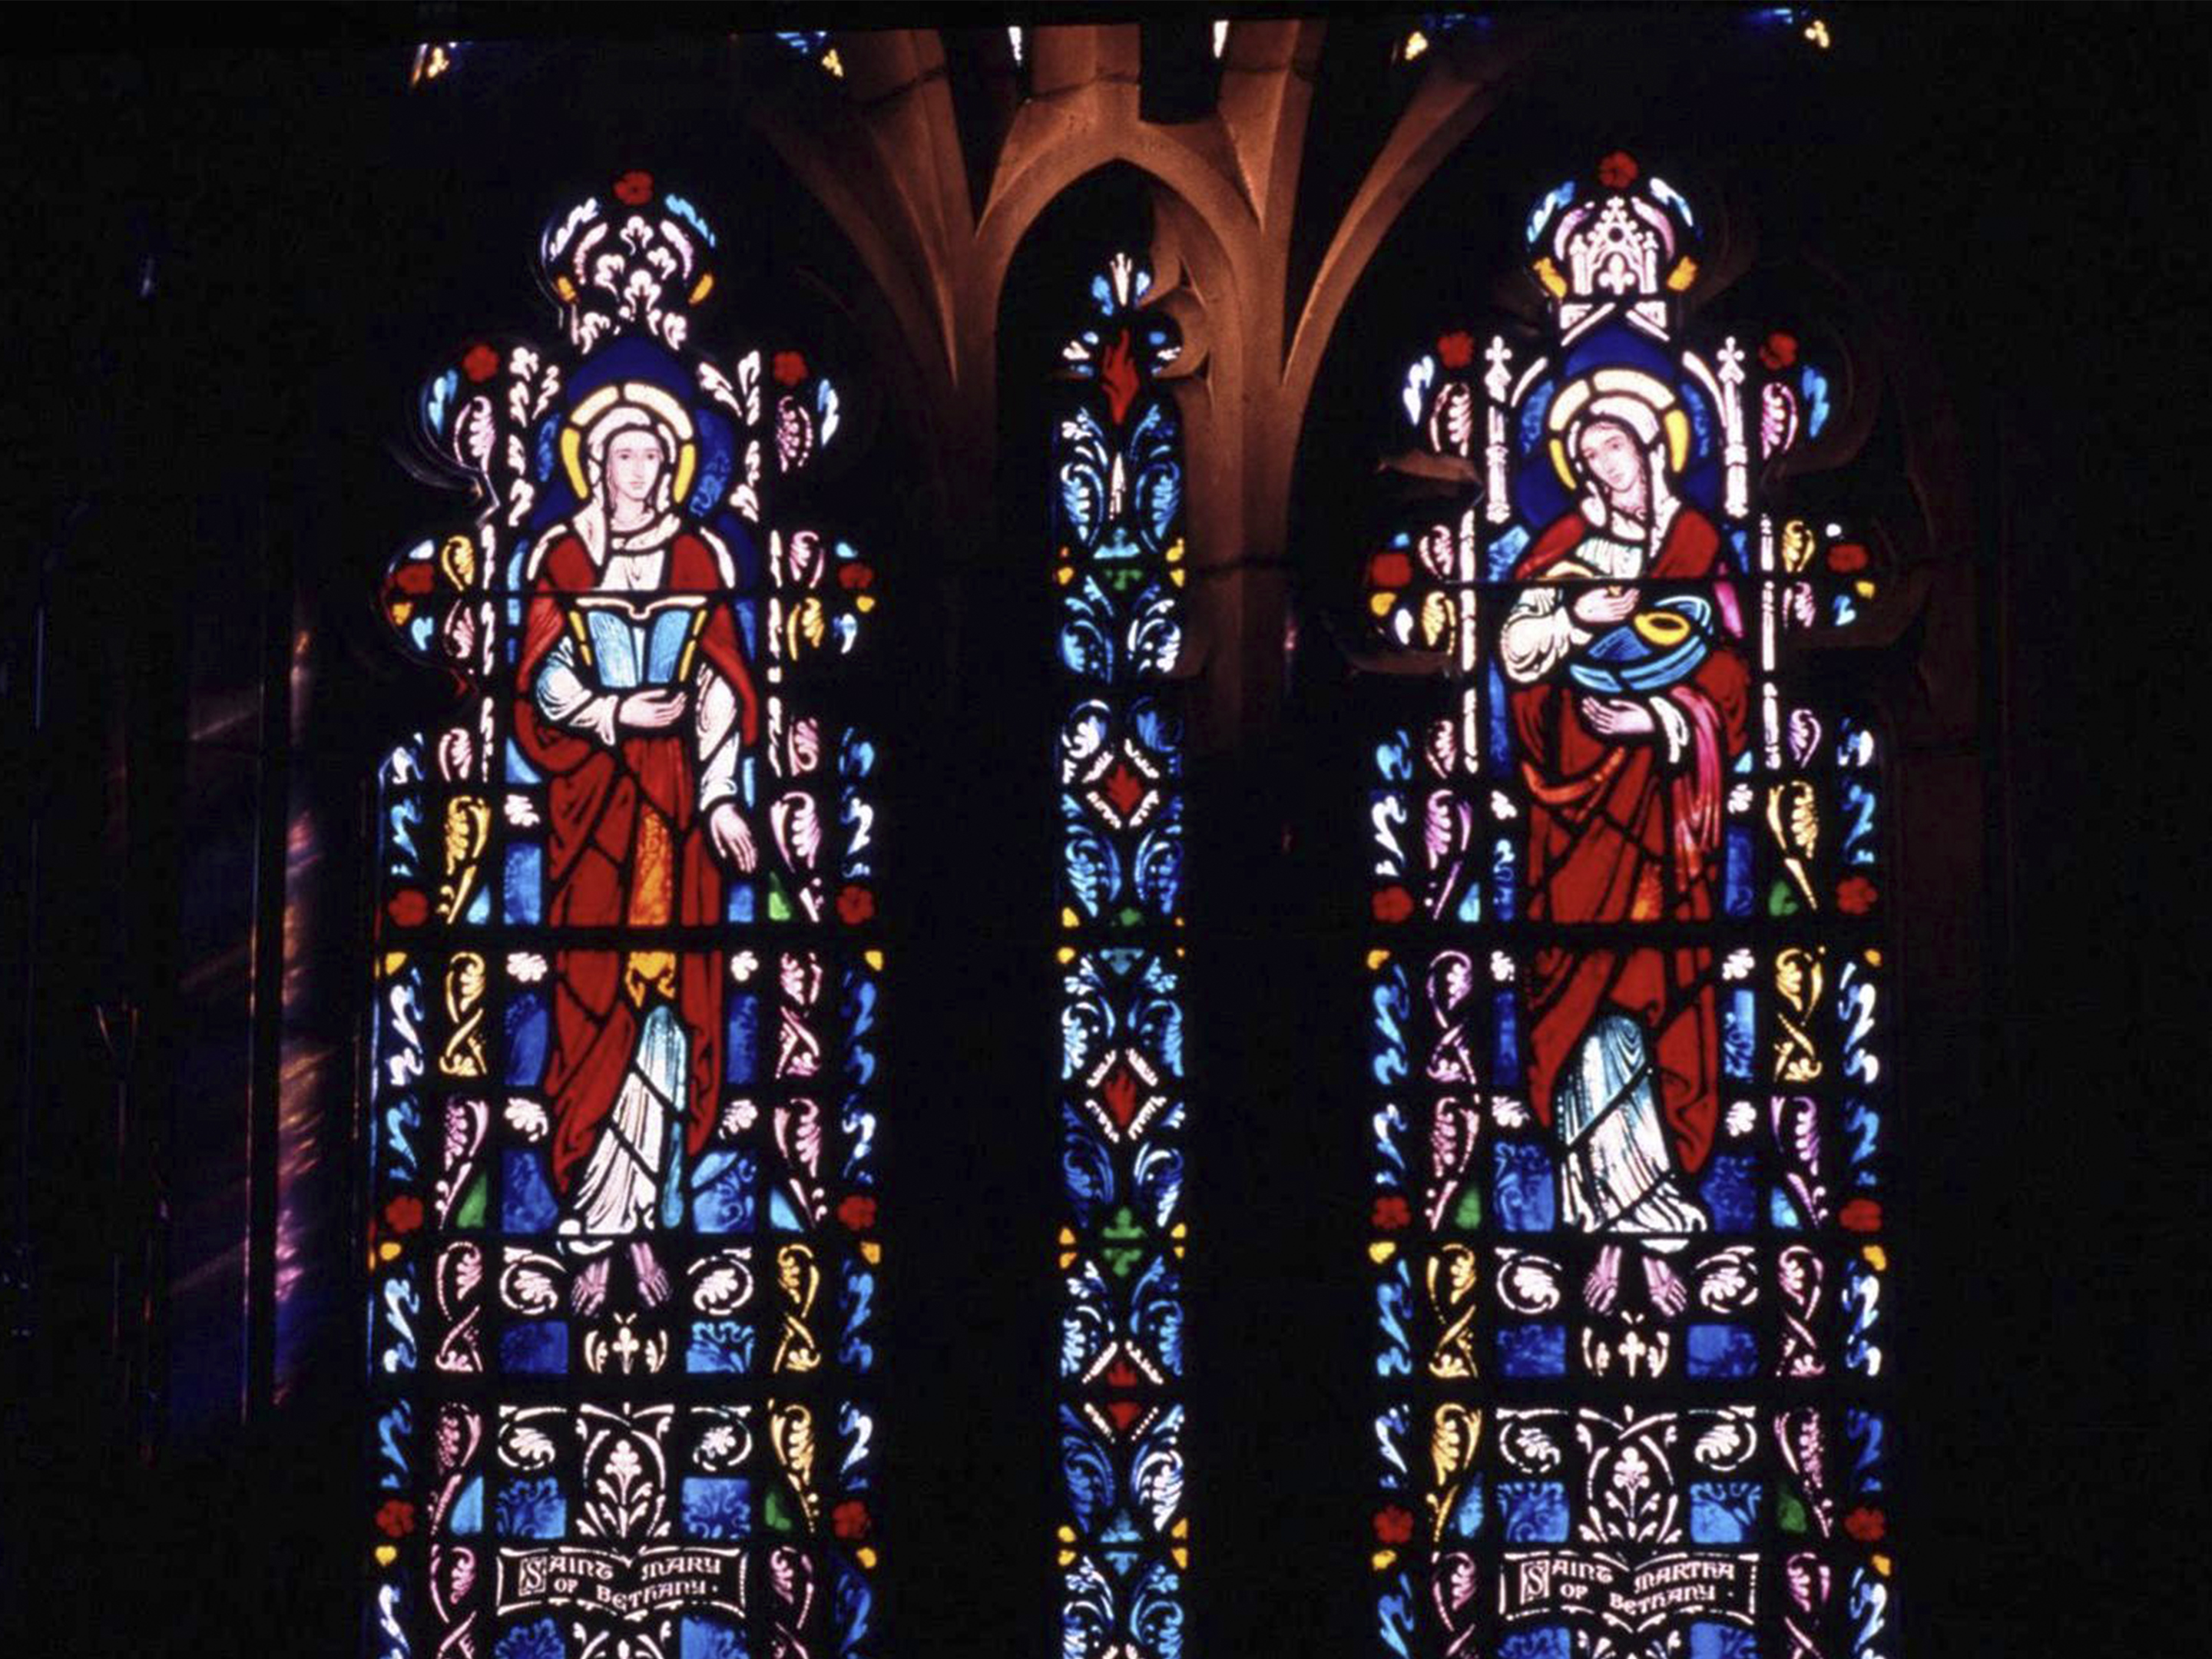 Two panels of stained glass featuring Mary Magdalene and Mary, mother of Jesus on a stone chapel wall